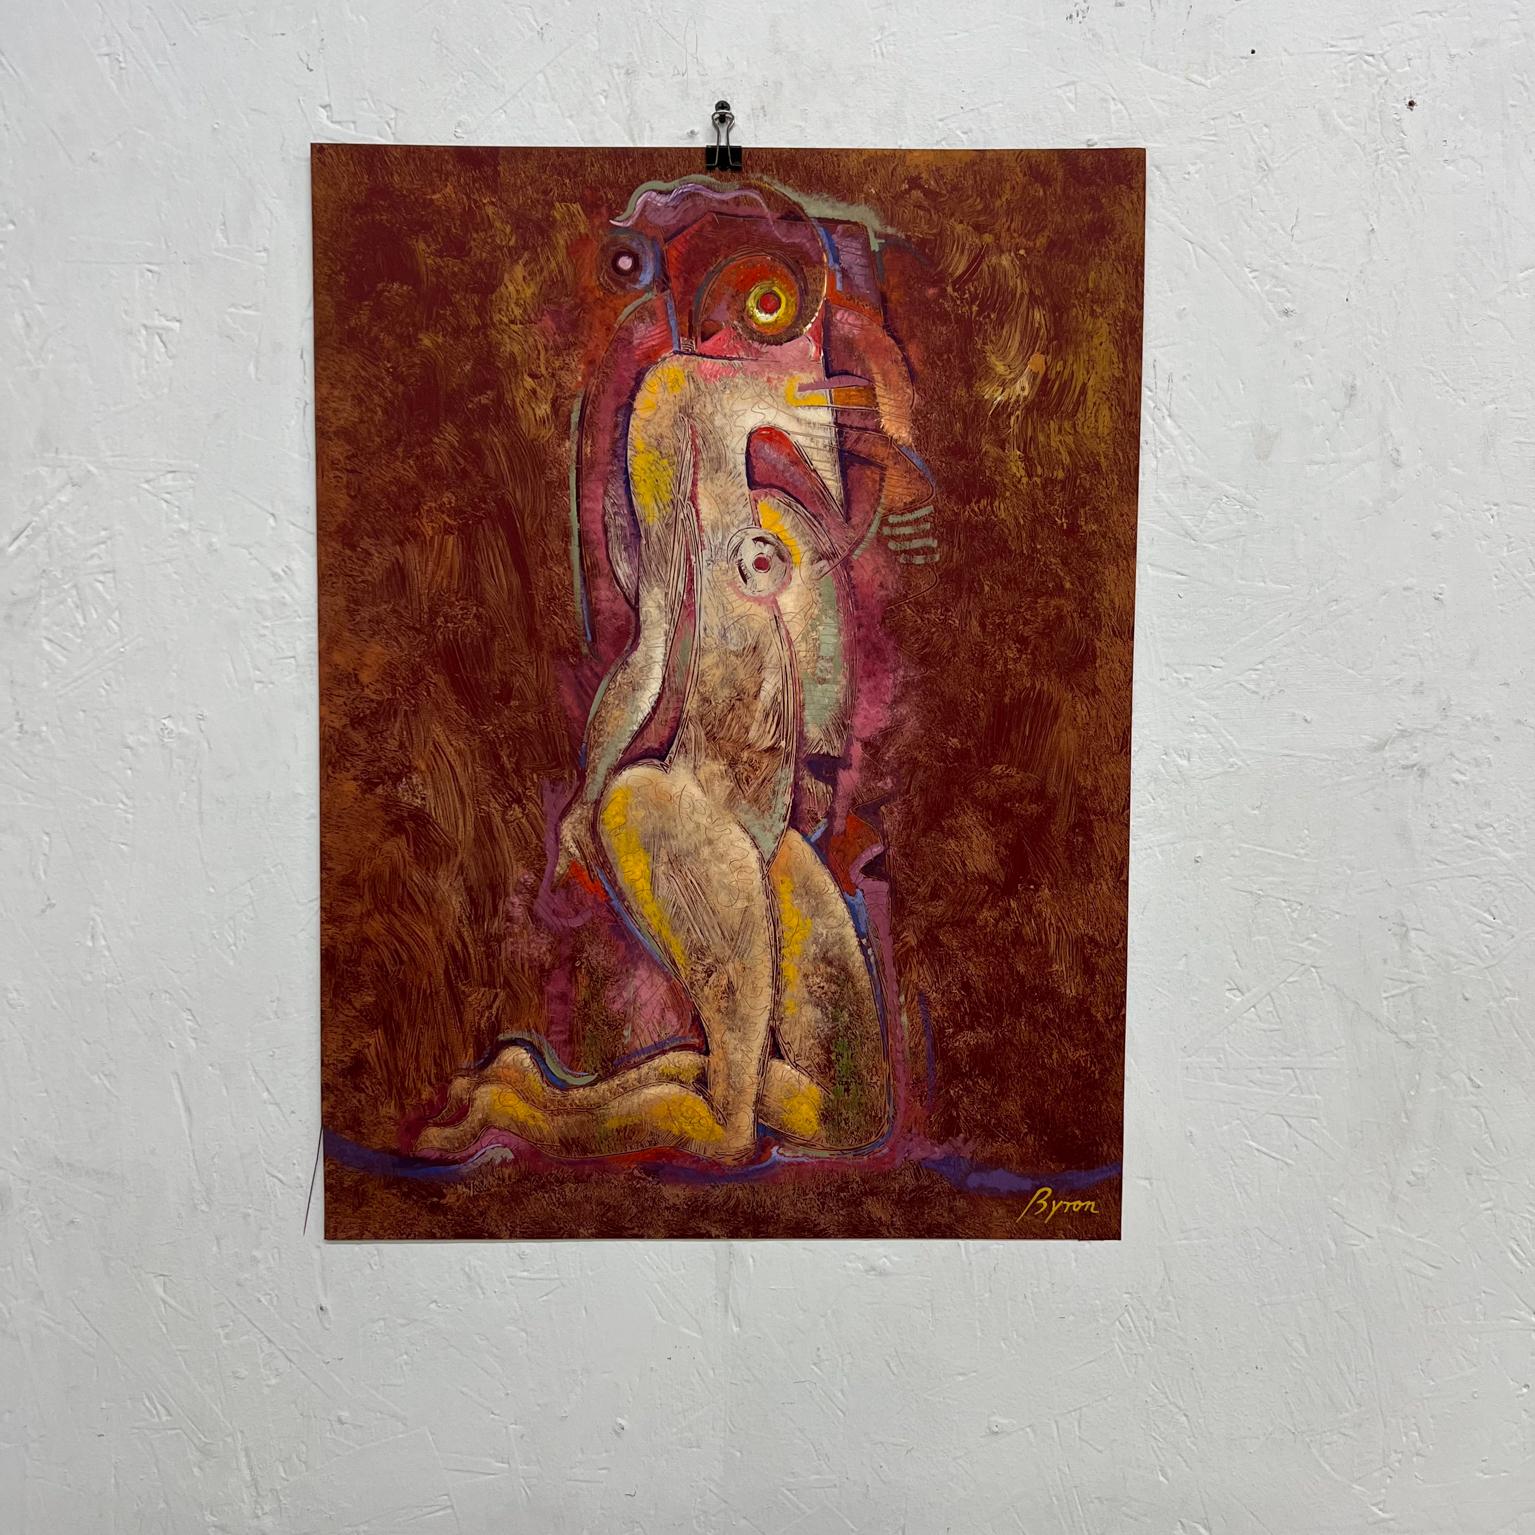 1980s Byron Gálvez Mexican Modernism Artwork Abstract Nude Mixed Media
17.75 x 23.75
Signed art
Preowned unrestored vintage condition art
See all images provided.

 